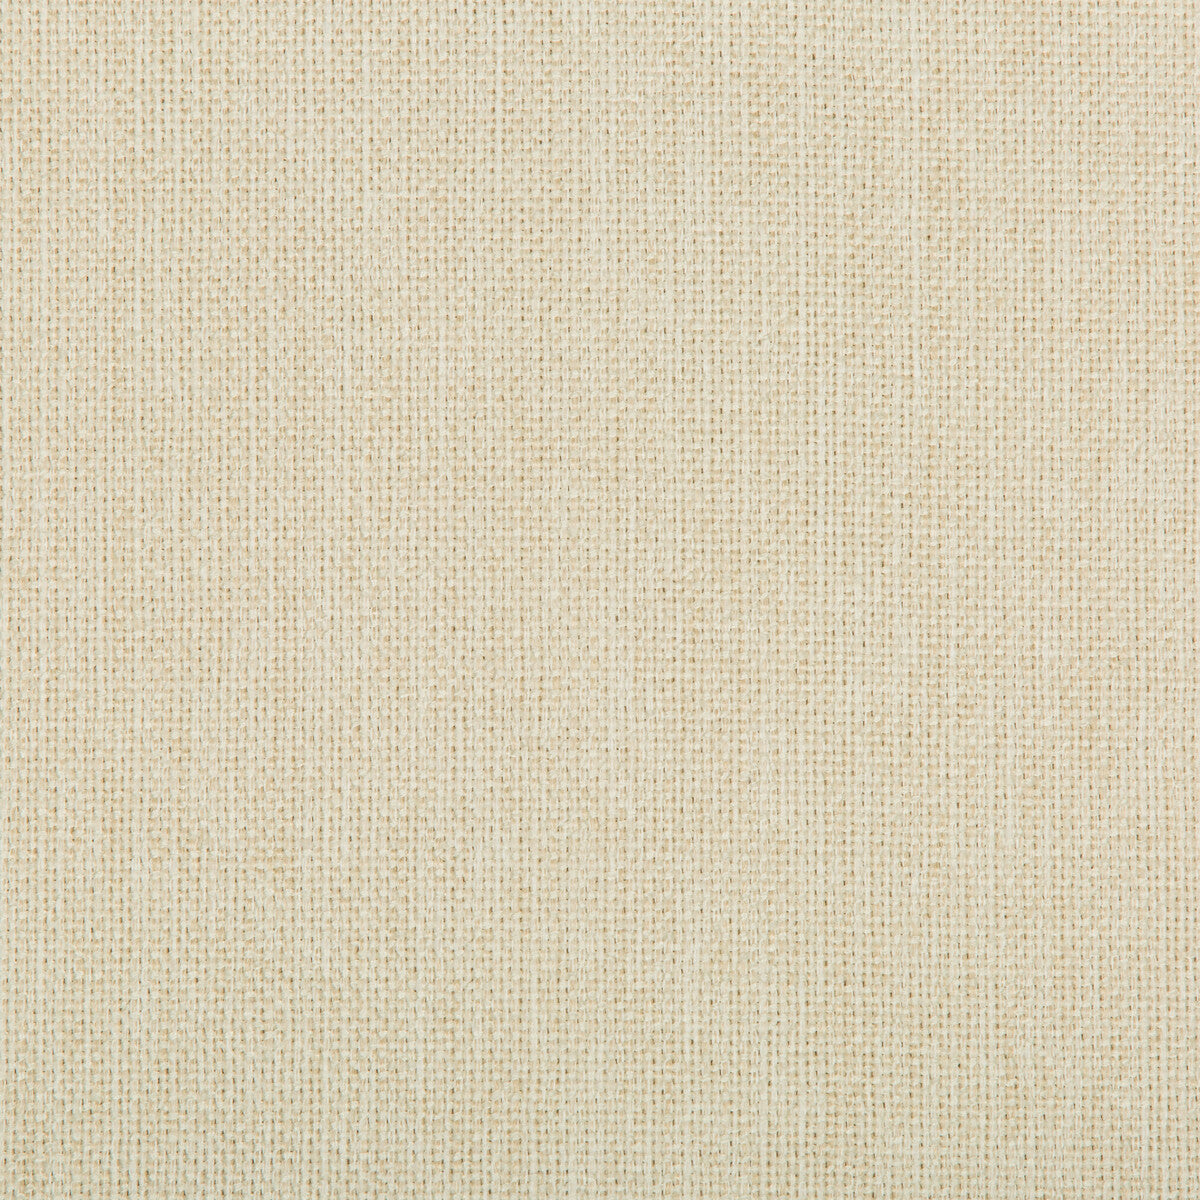 Williams fabric in sea salt color - pattern 35744.1.0 - by Kravet Contract in the Value Kravetarmor collection